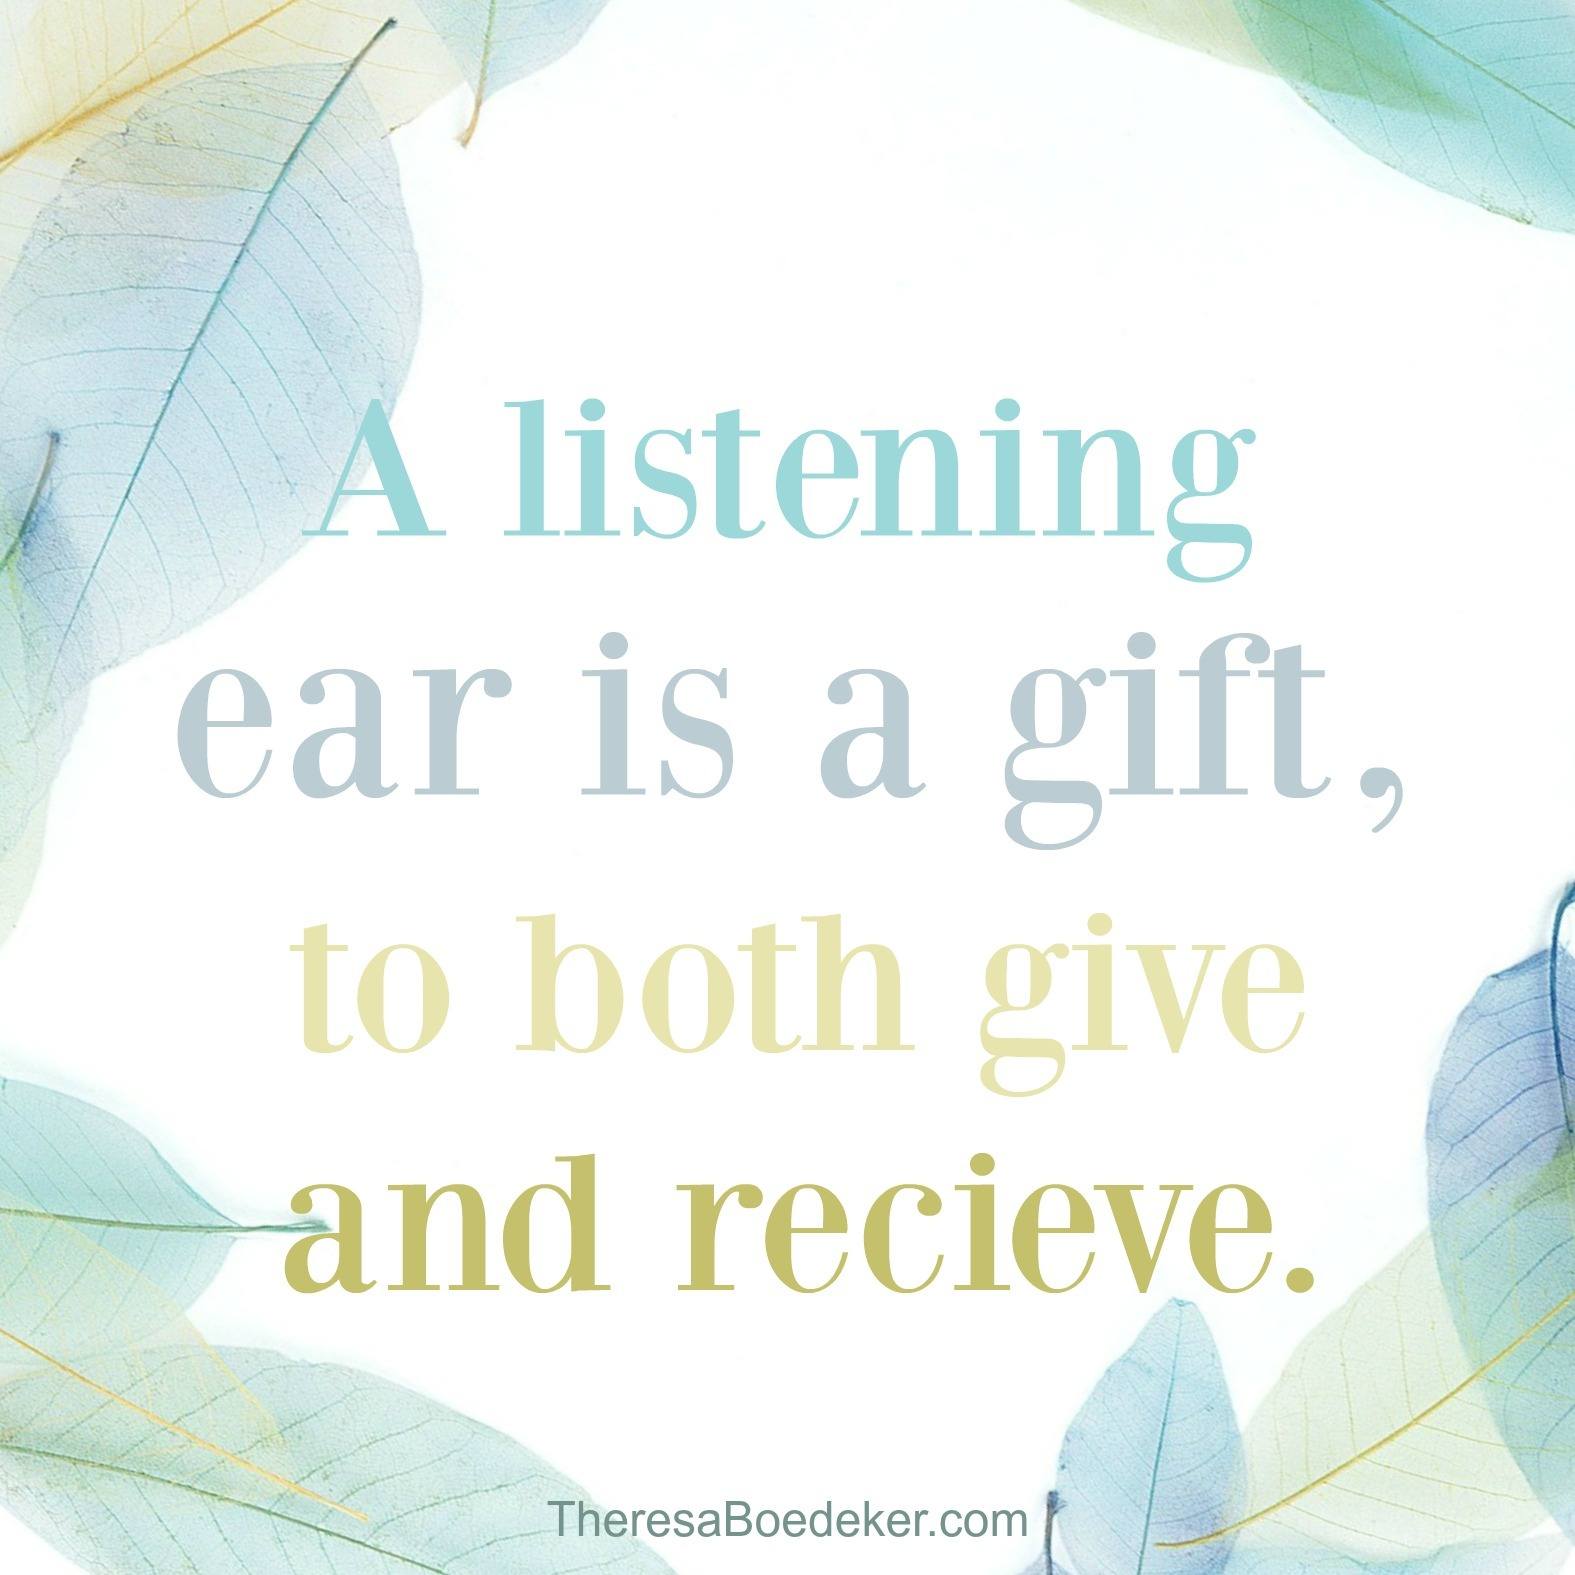 Sometimes it is better to listen more than talk. Learn the qualities of a good listener.